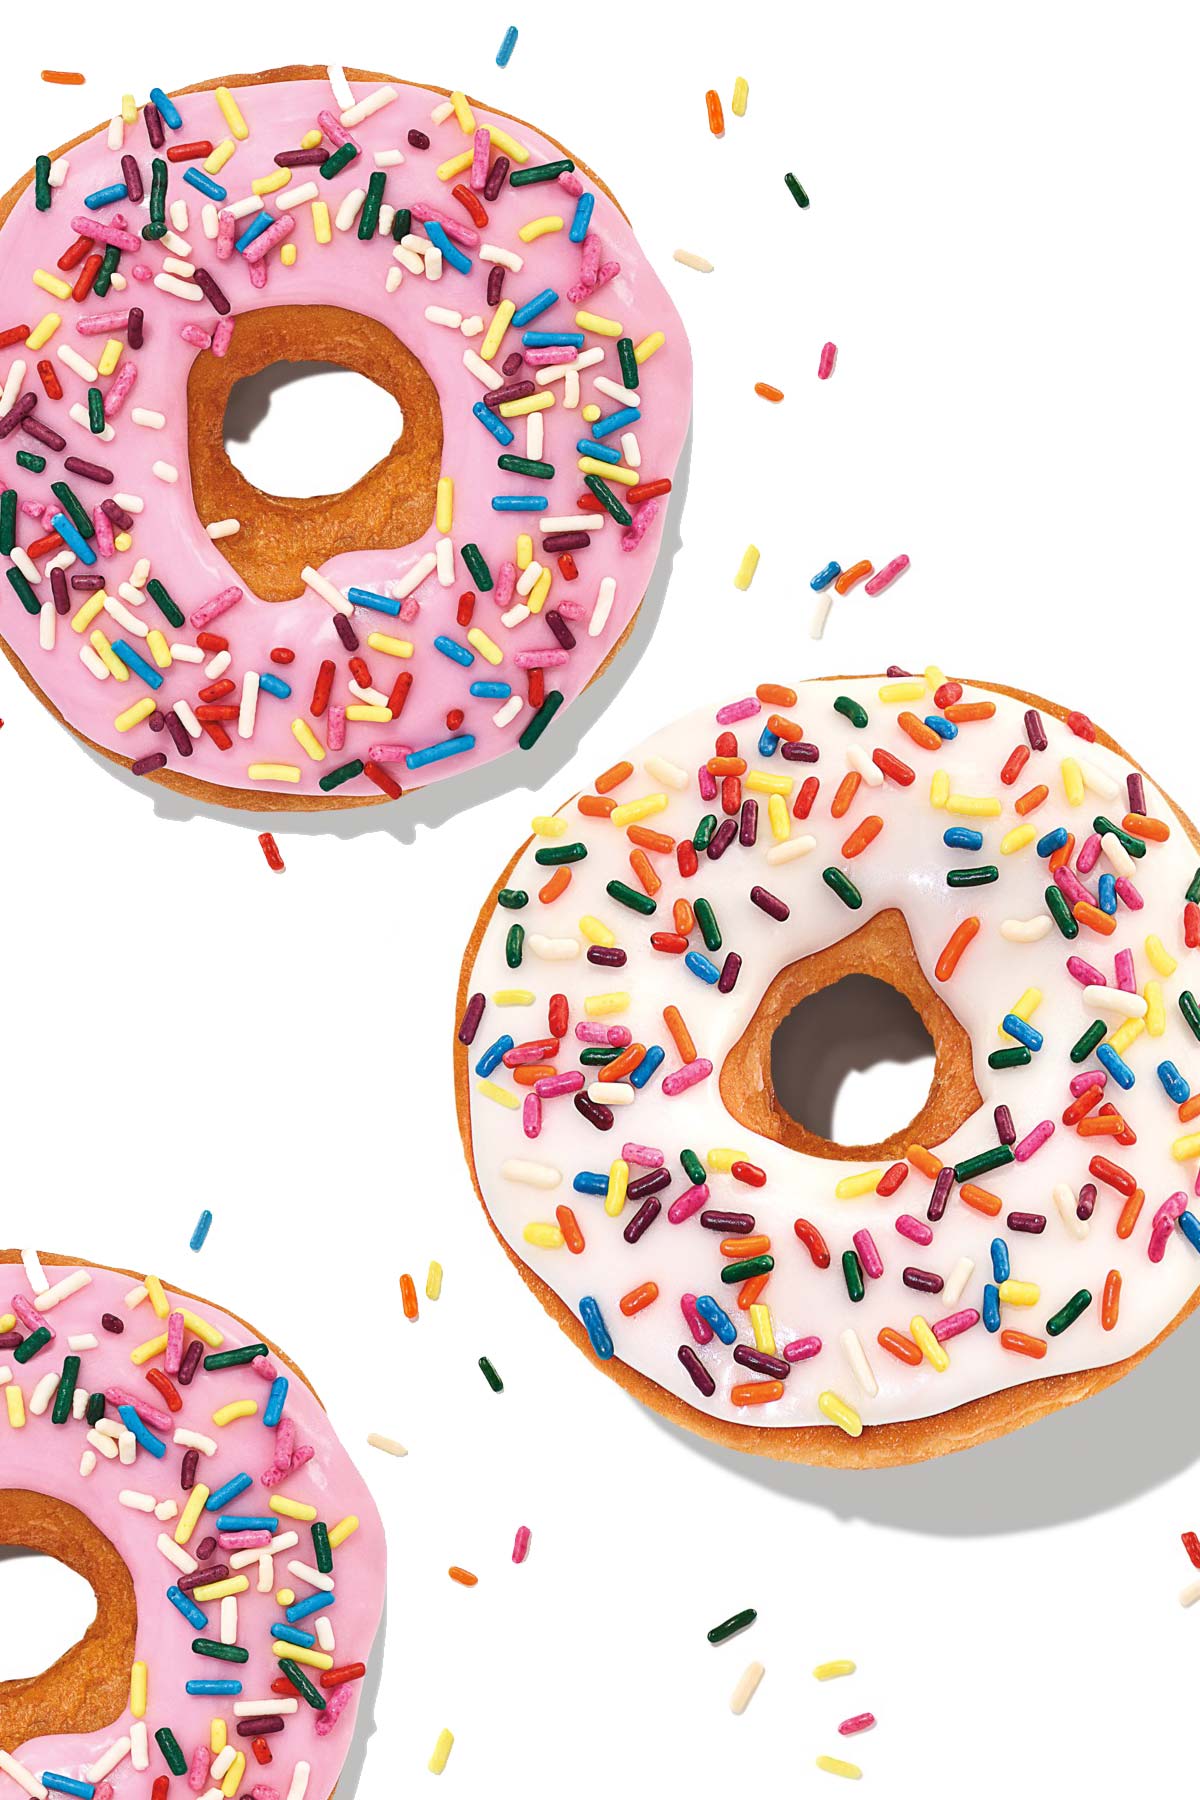 Two strawberry-frosted sprinkled donuts and one vanilla-frosted sprinkled donuts from Dunkin' on a white background.